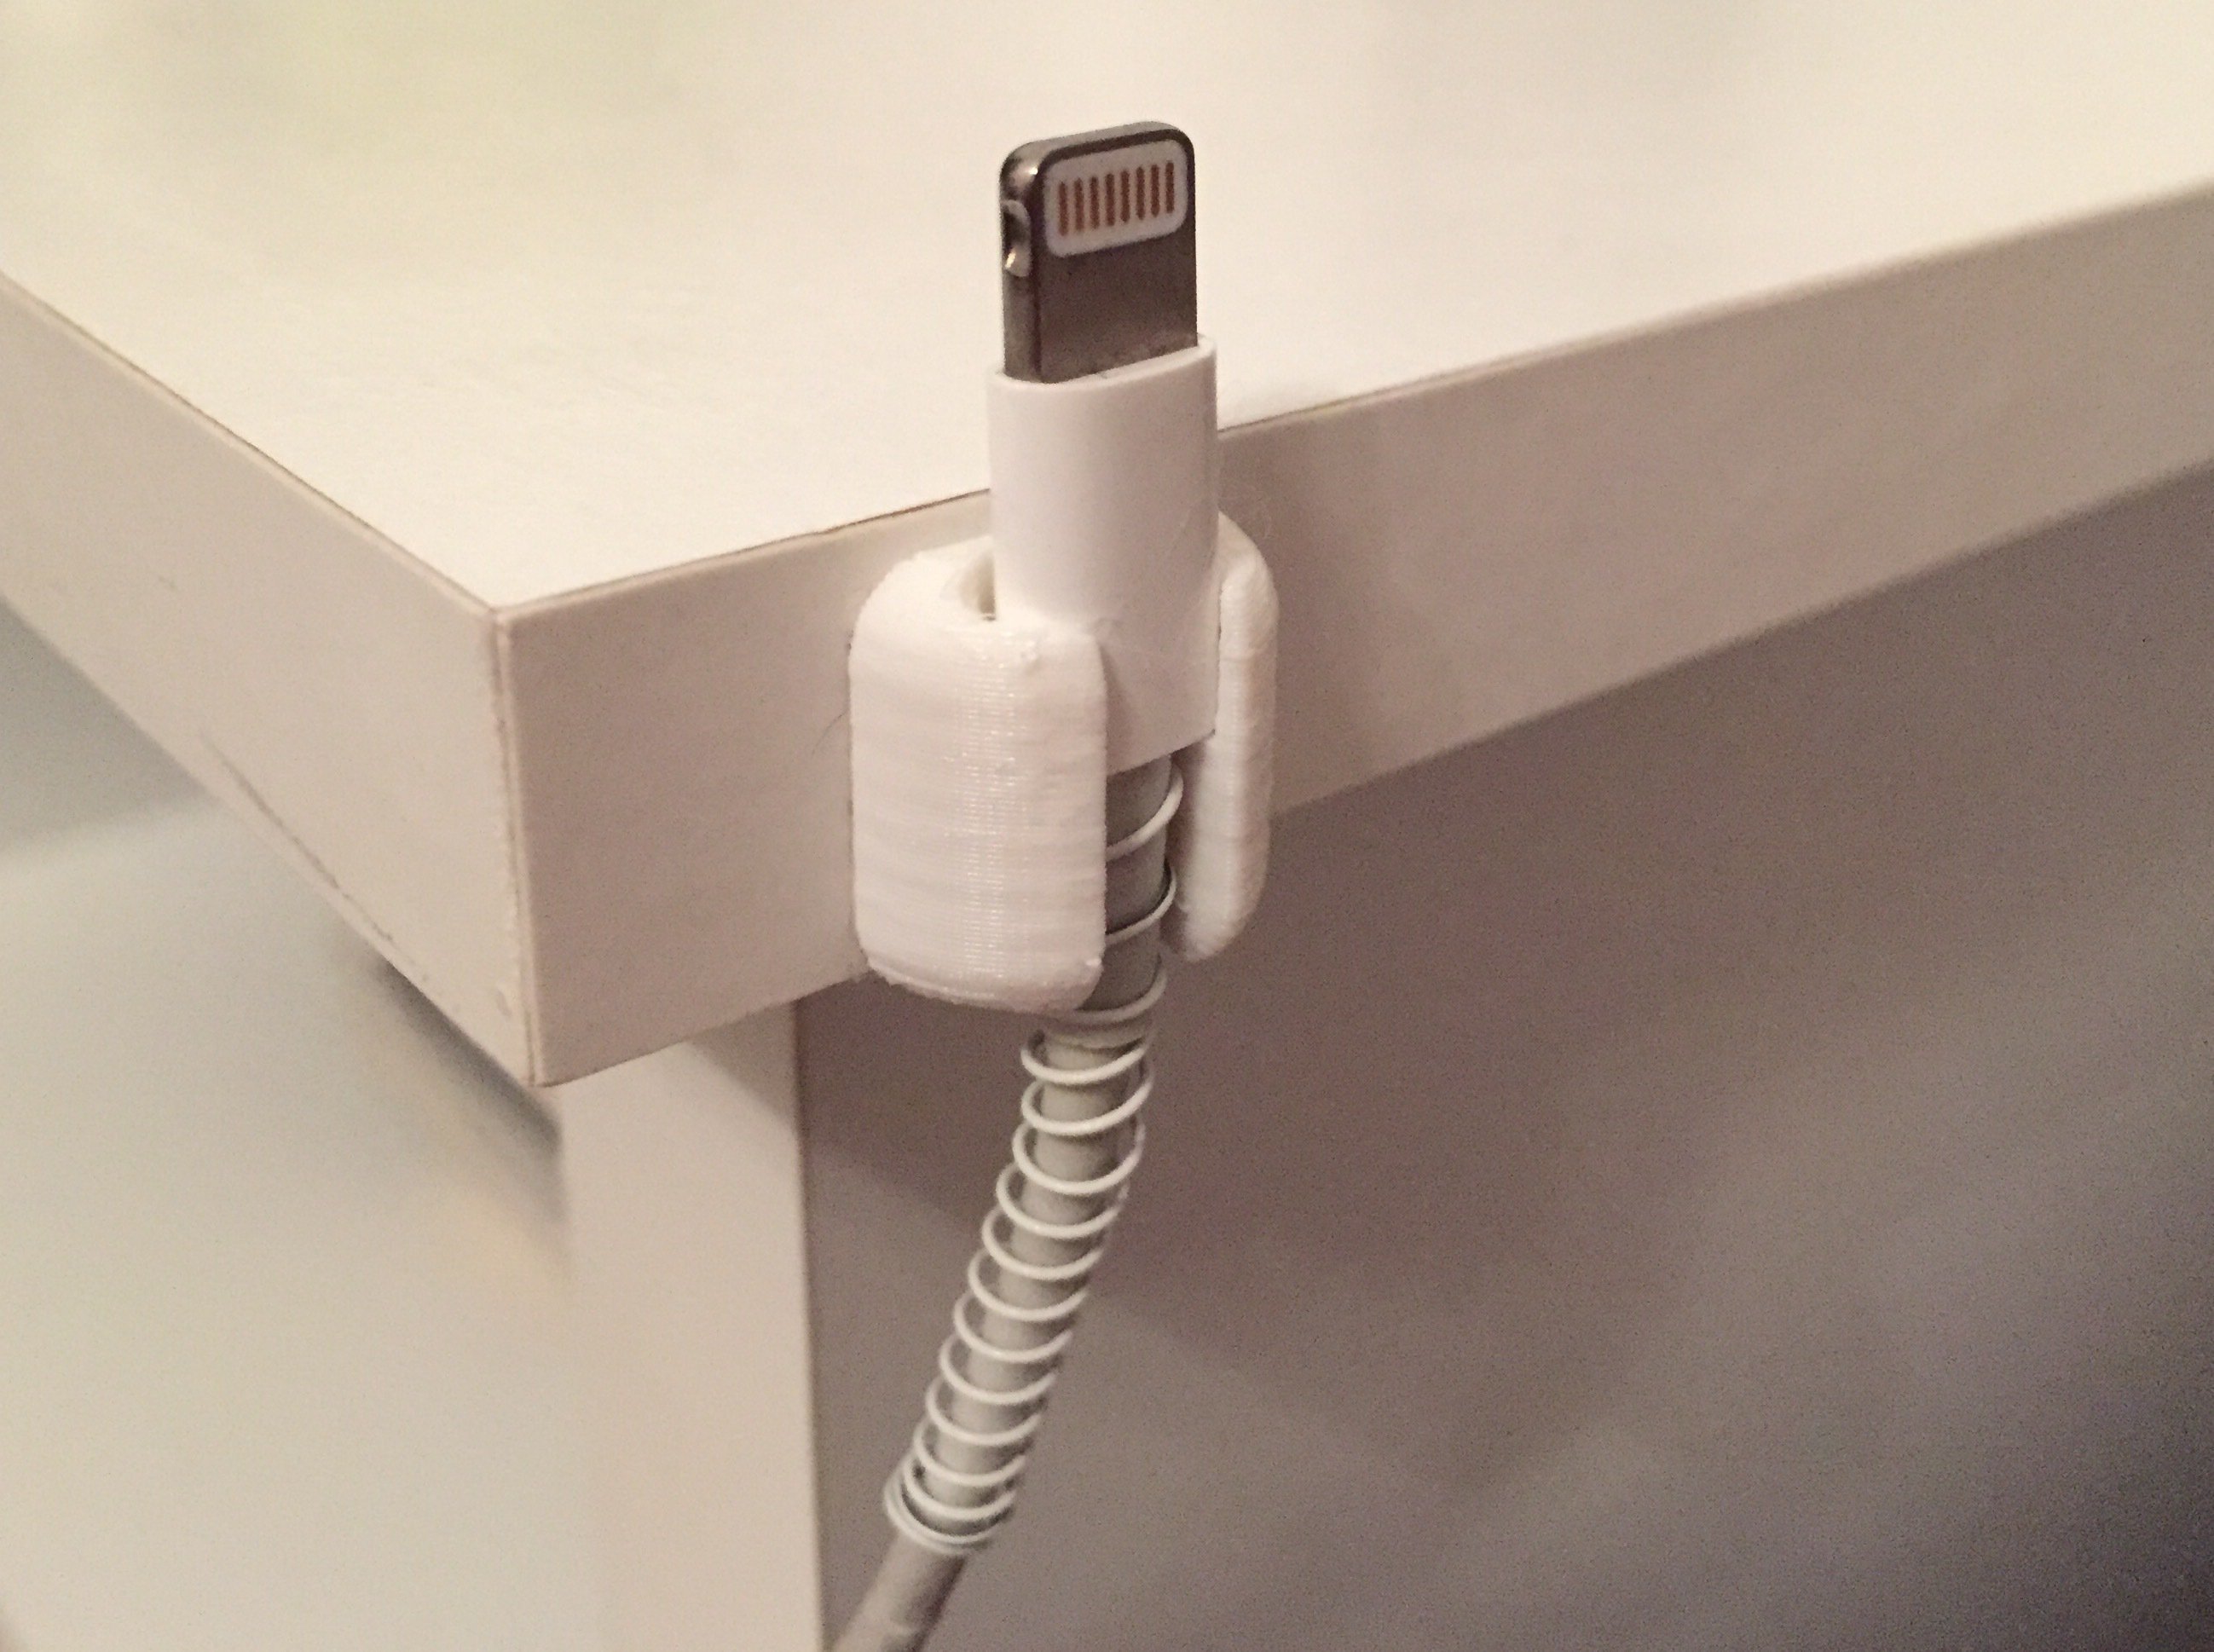 Cable holder for night stand - apple lightning by Ekdahl | Pinshape